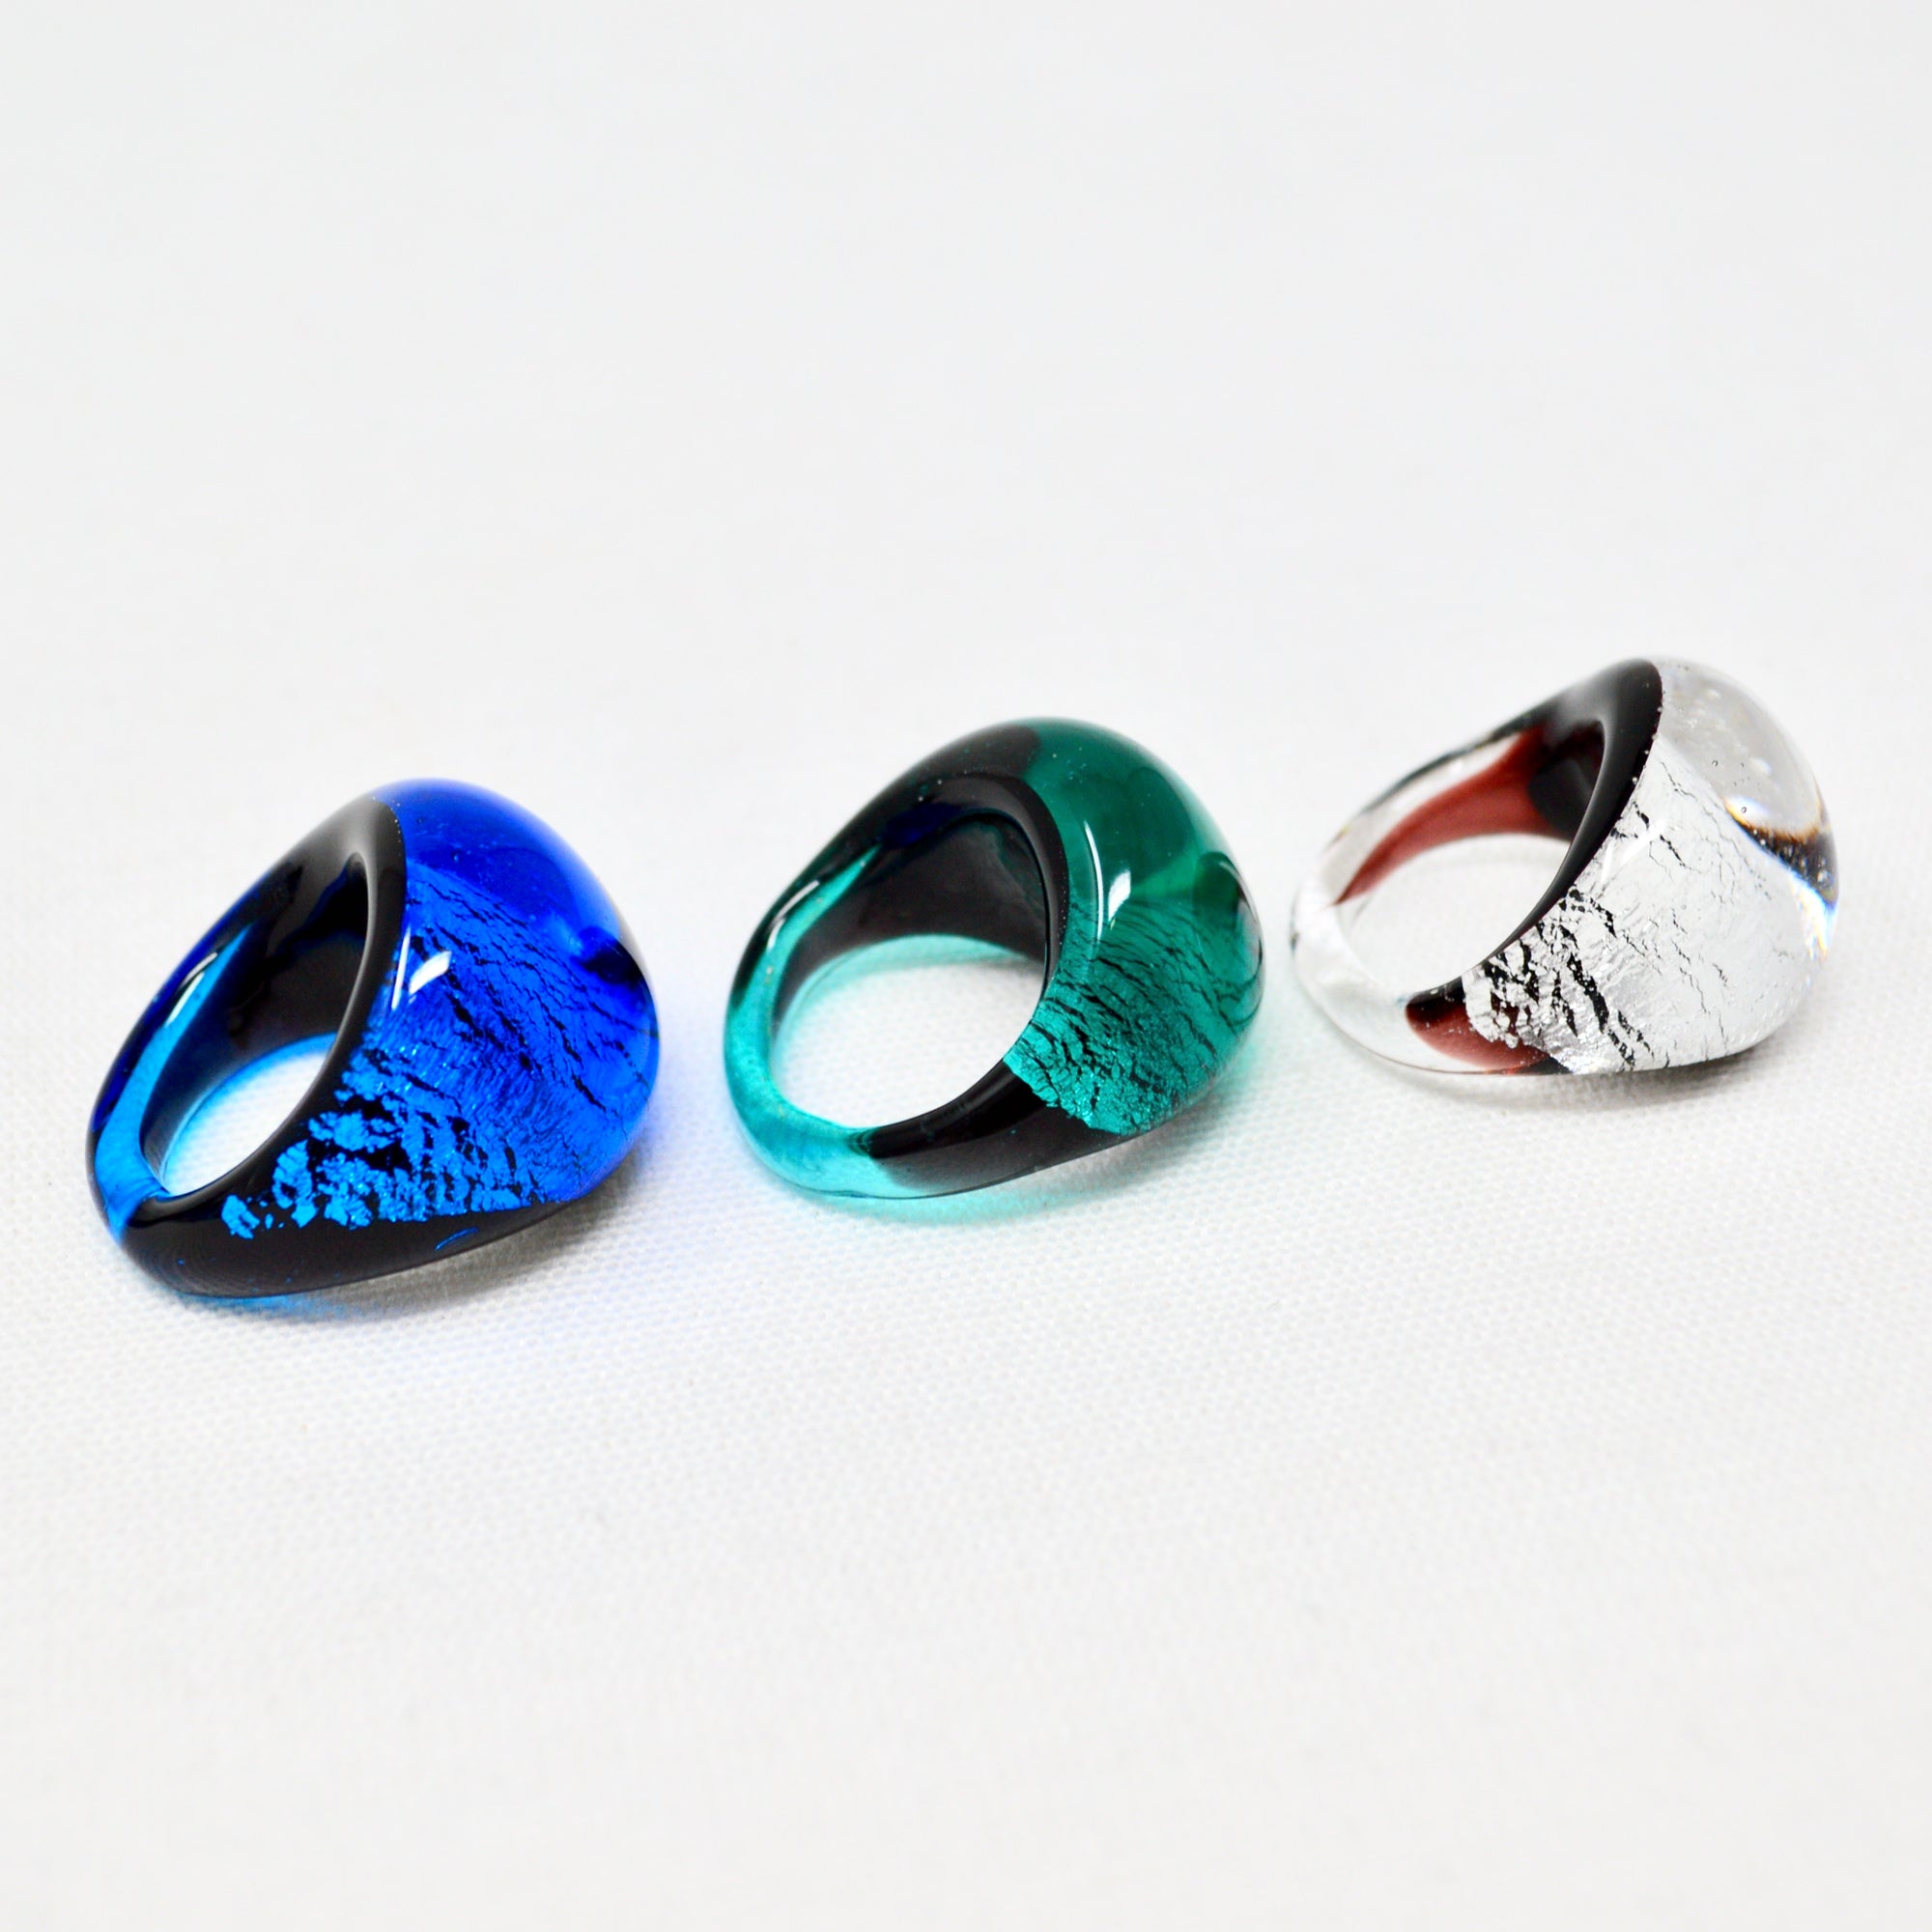 Murano Glass Arno Statement Rings, Cobalt, Teal, Silver, Made in Italy - My Italian Decor